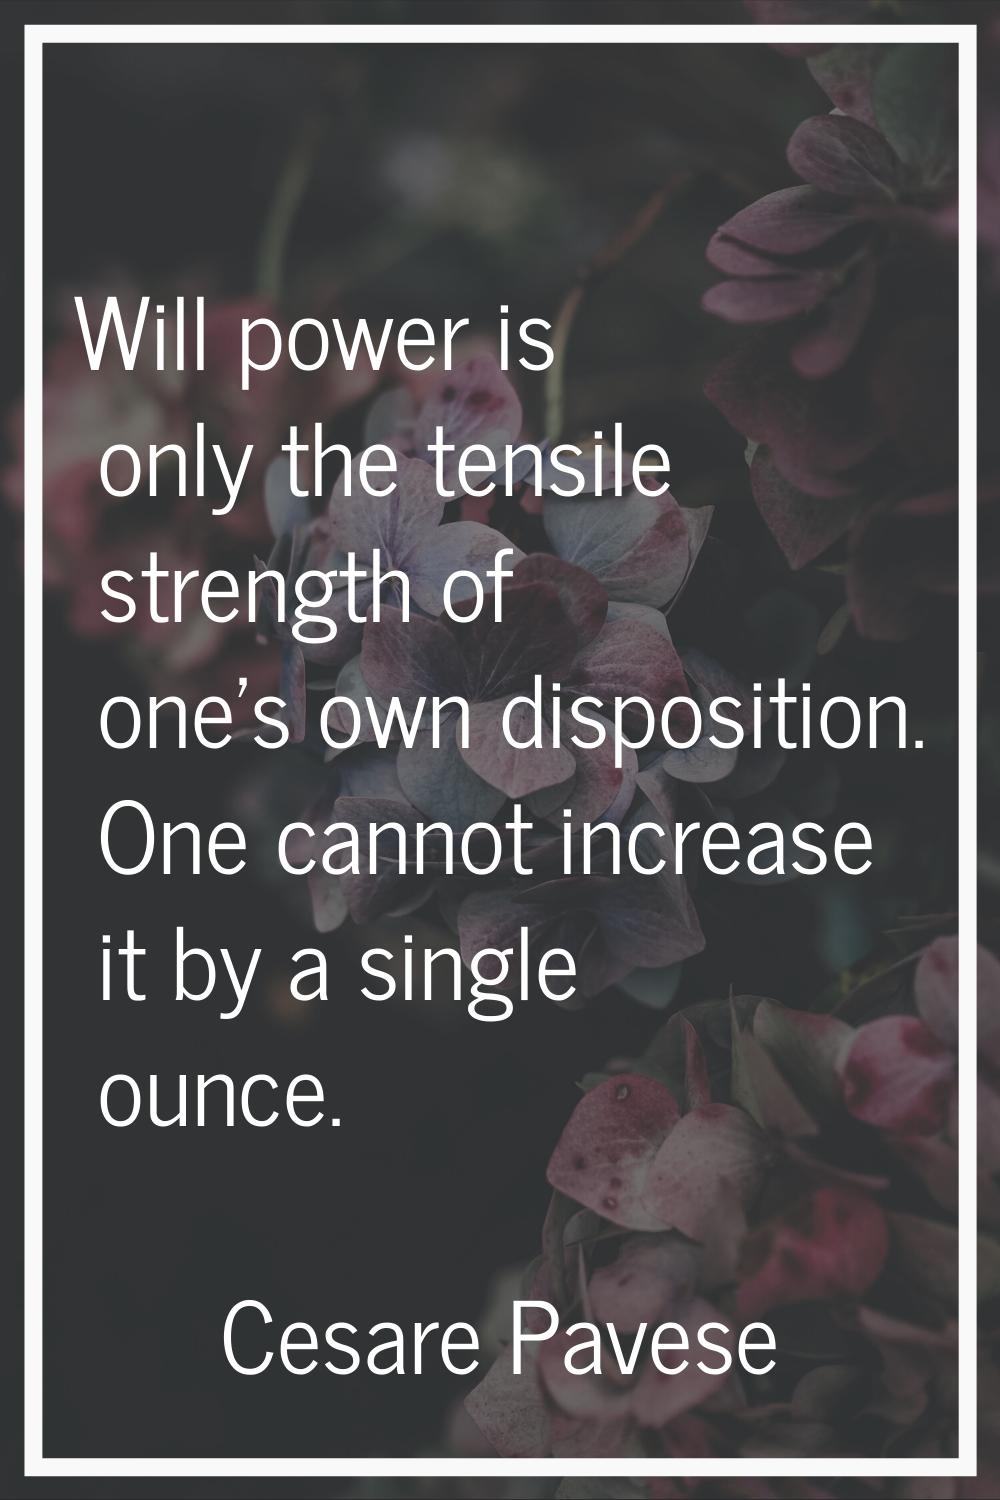 Will power is only the tensile strength of one's own disposition. One cannot increase it by a singl